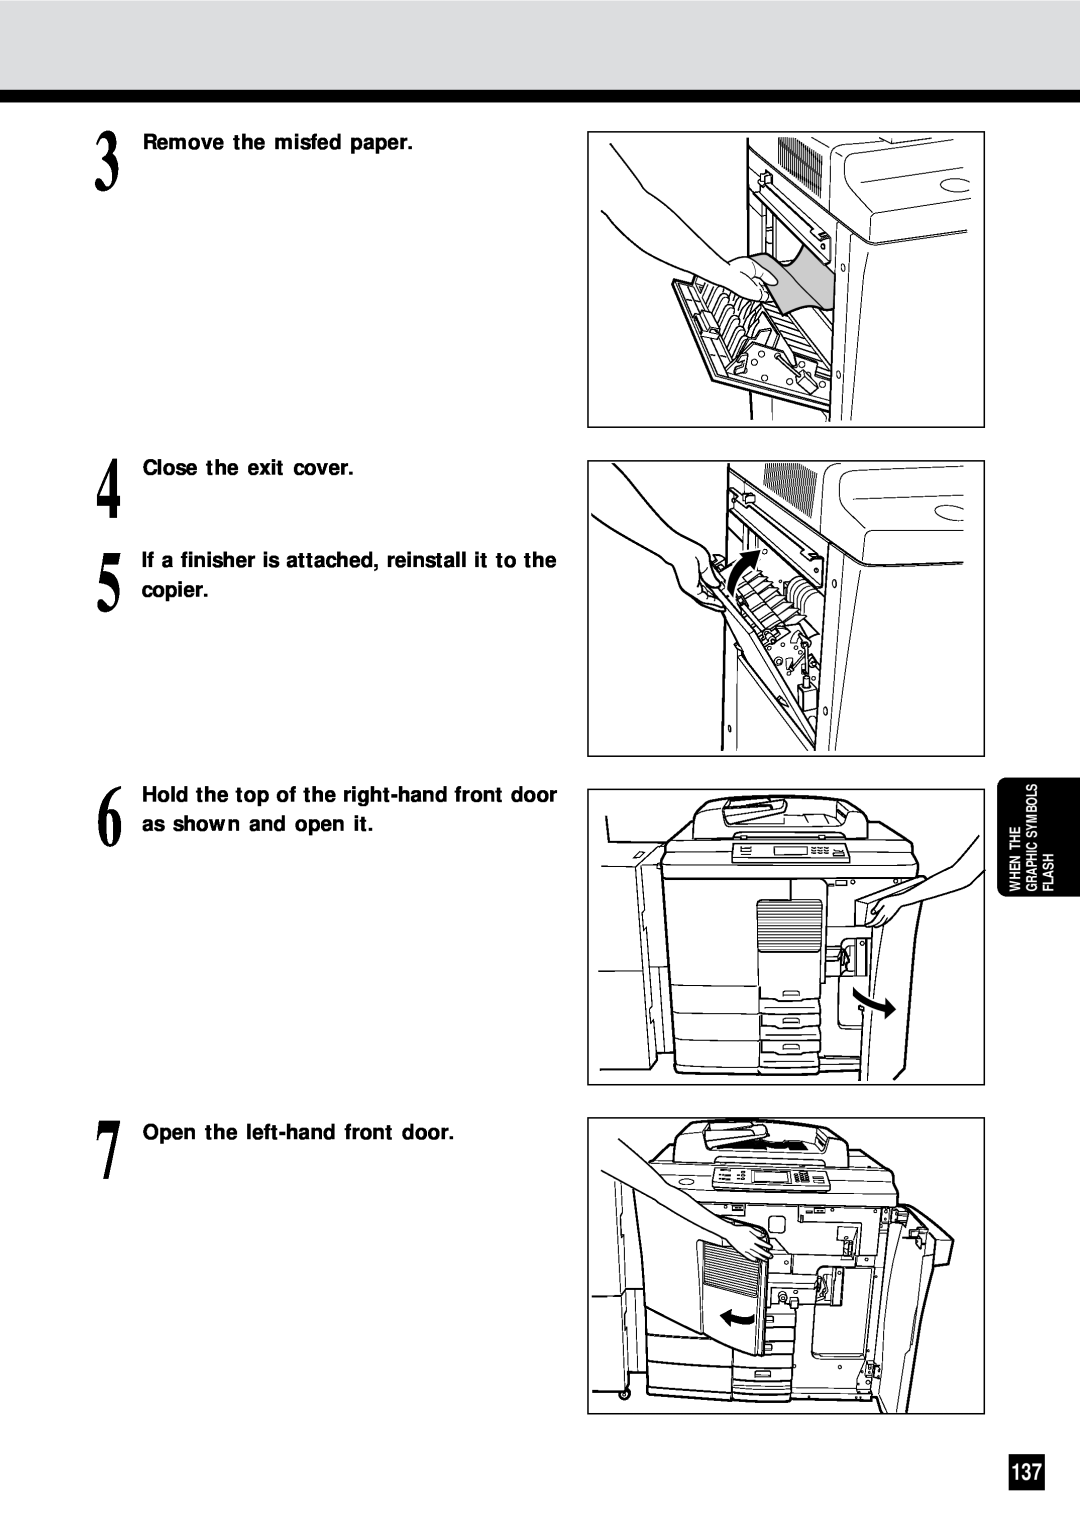 Sharp AR-650 Remove the misfed paper Close the exit cover, If a finisher is attached, reinstall it to the copier, Whenthe 